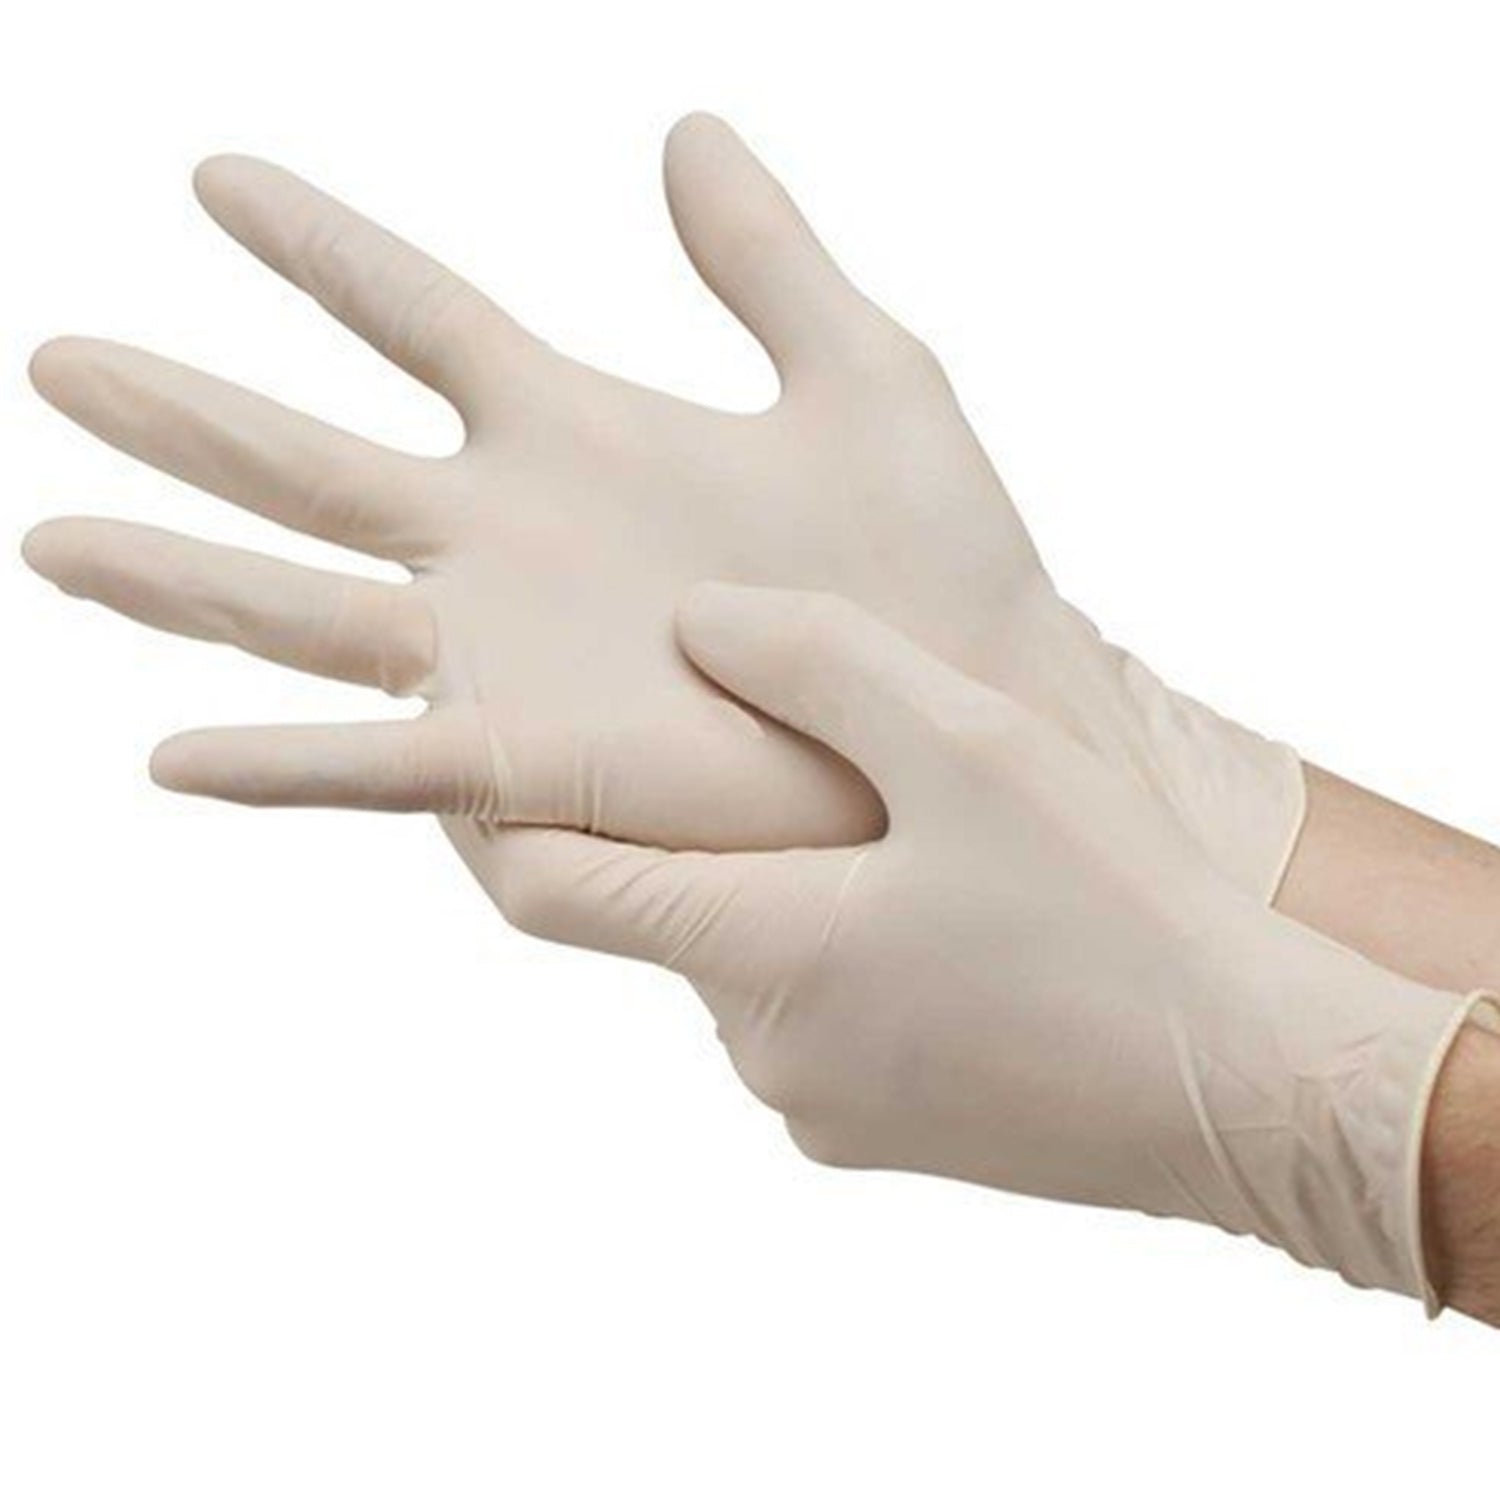 Premier Latex Sterile Powder Free Gloves | Small | Pack of 50 pairs (3)